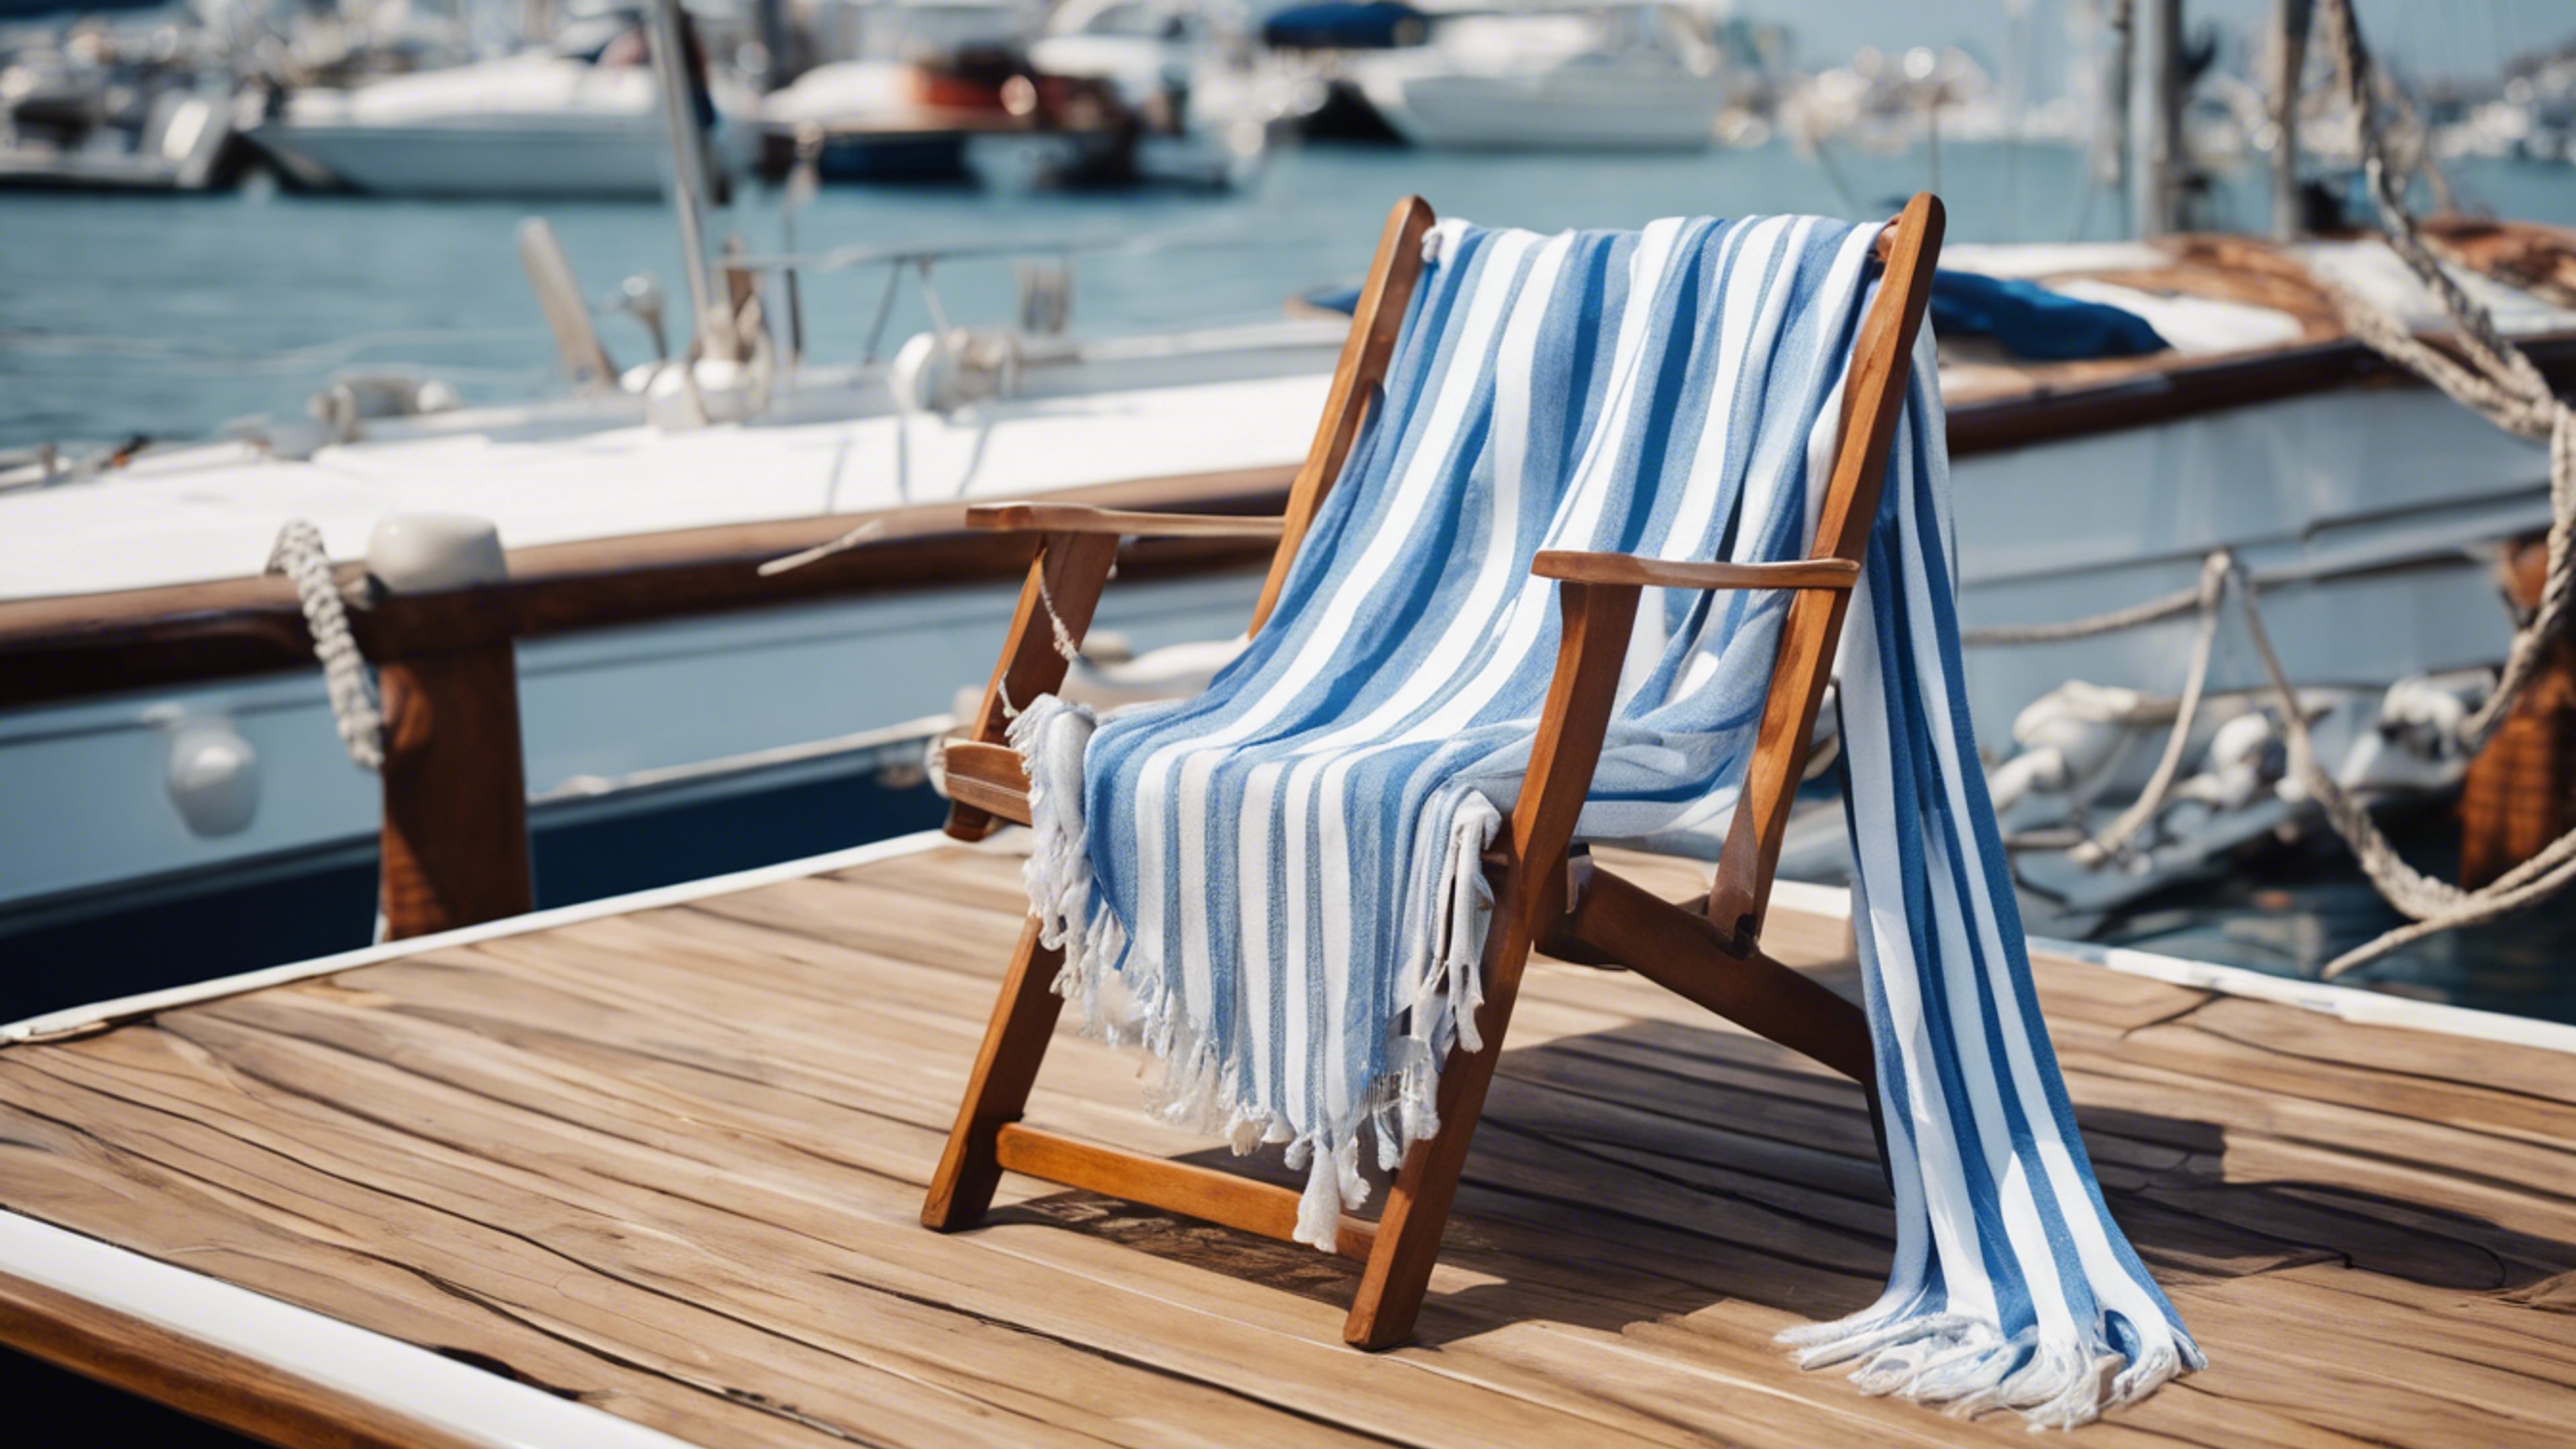 Preppy blue and white striped shawl draped over a teak deck chair on a sailboat. Tapet[8e59a438a9aa4e06a25d]